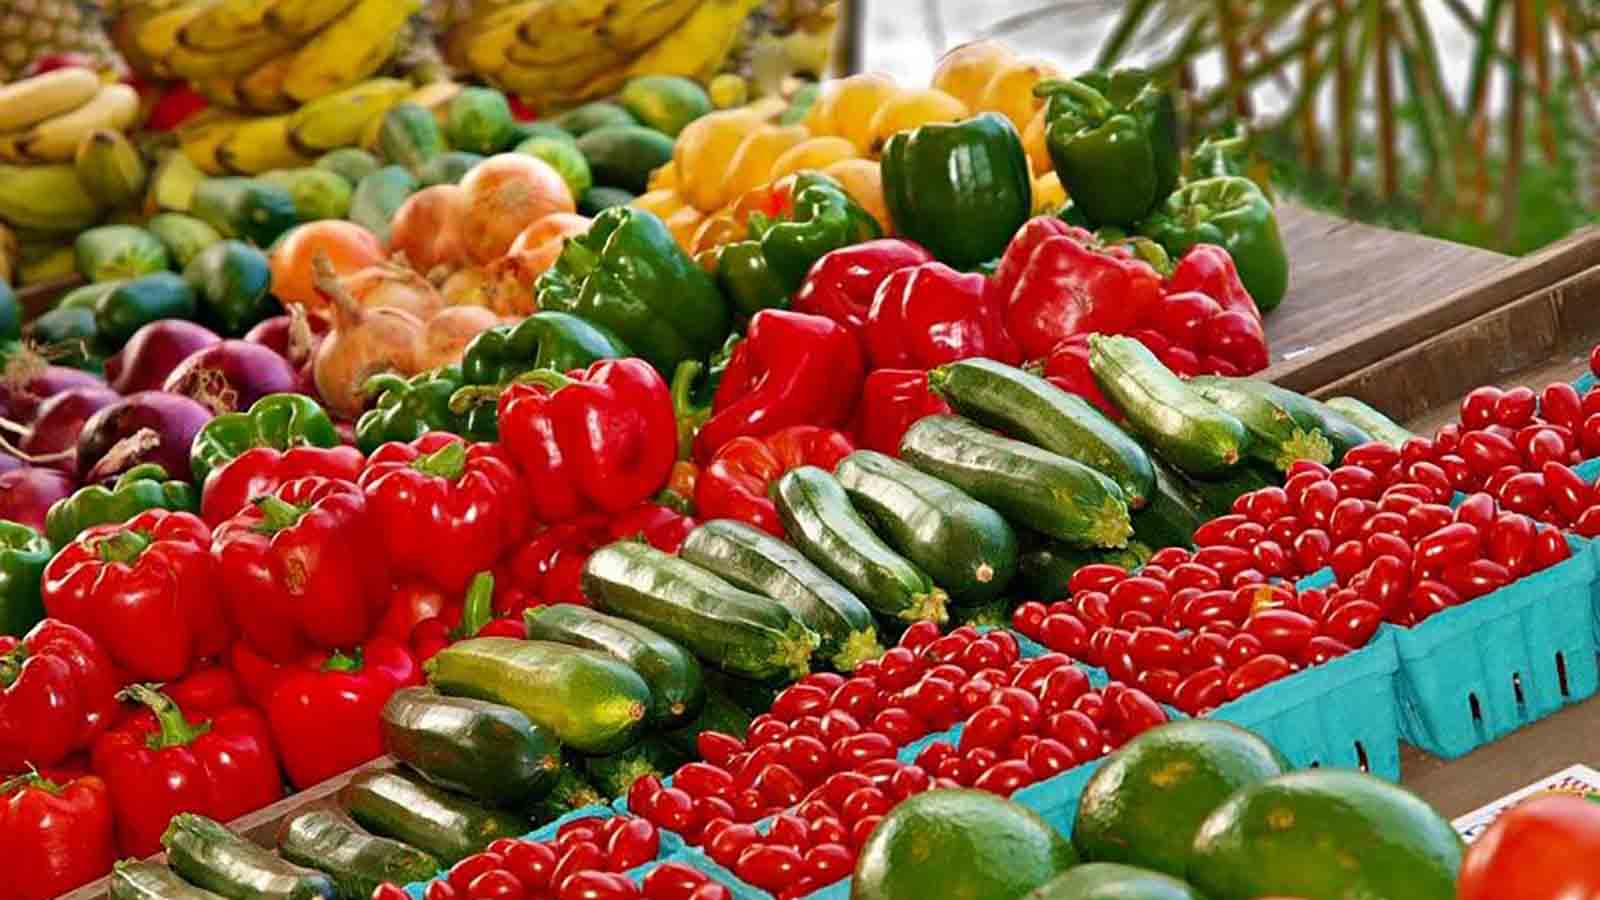 Zimbabwe to boost growth of horticulture sector with newly launched US$30m fund